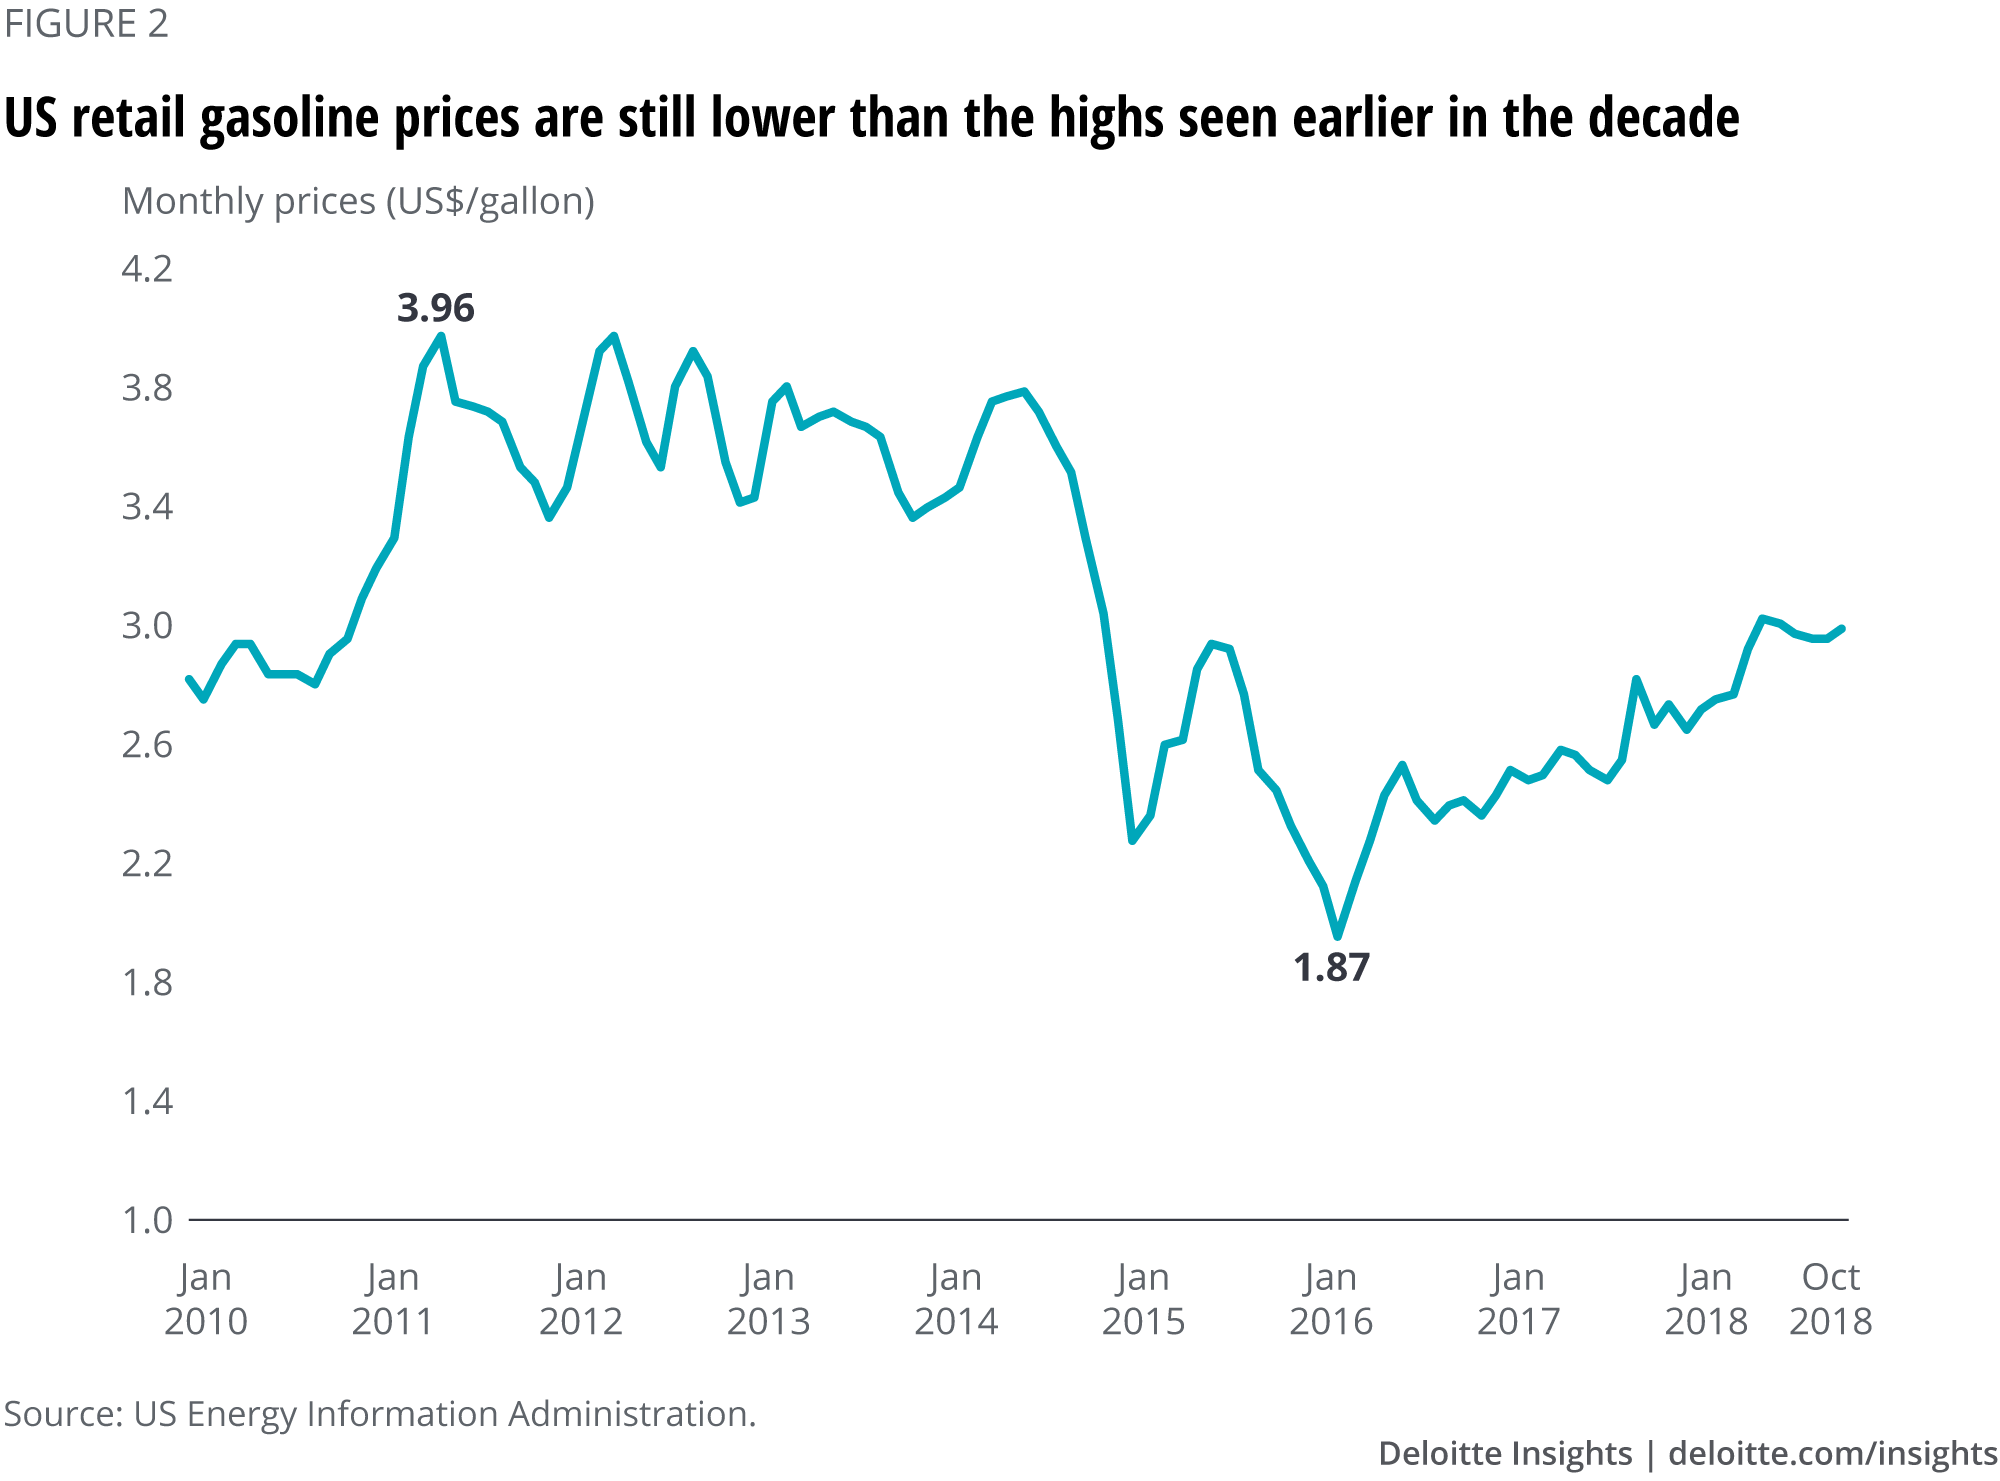 US retail gasoline prices are still lower than the highs seen earlier in the decade